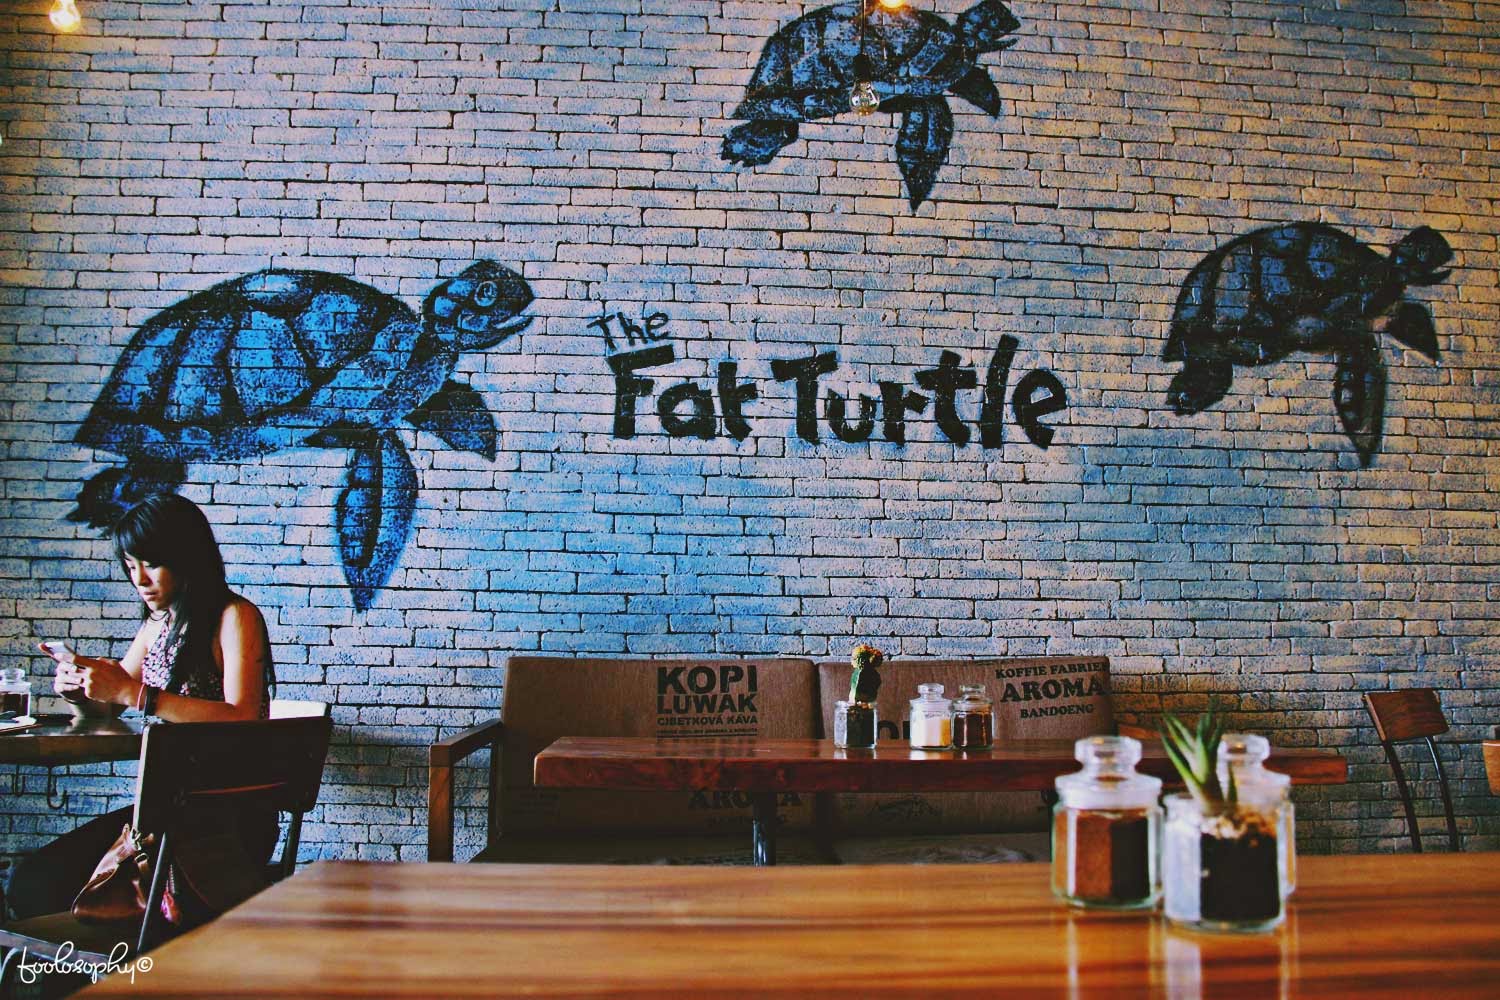 The Fat Turtle